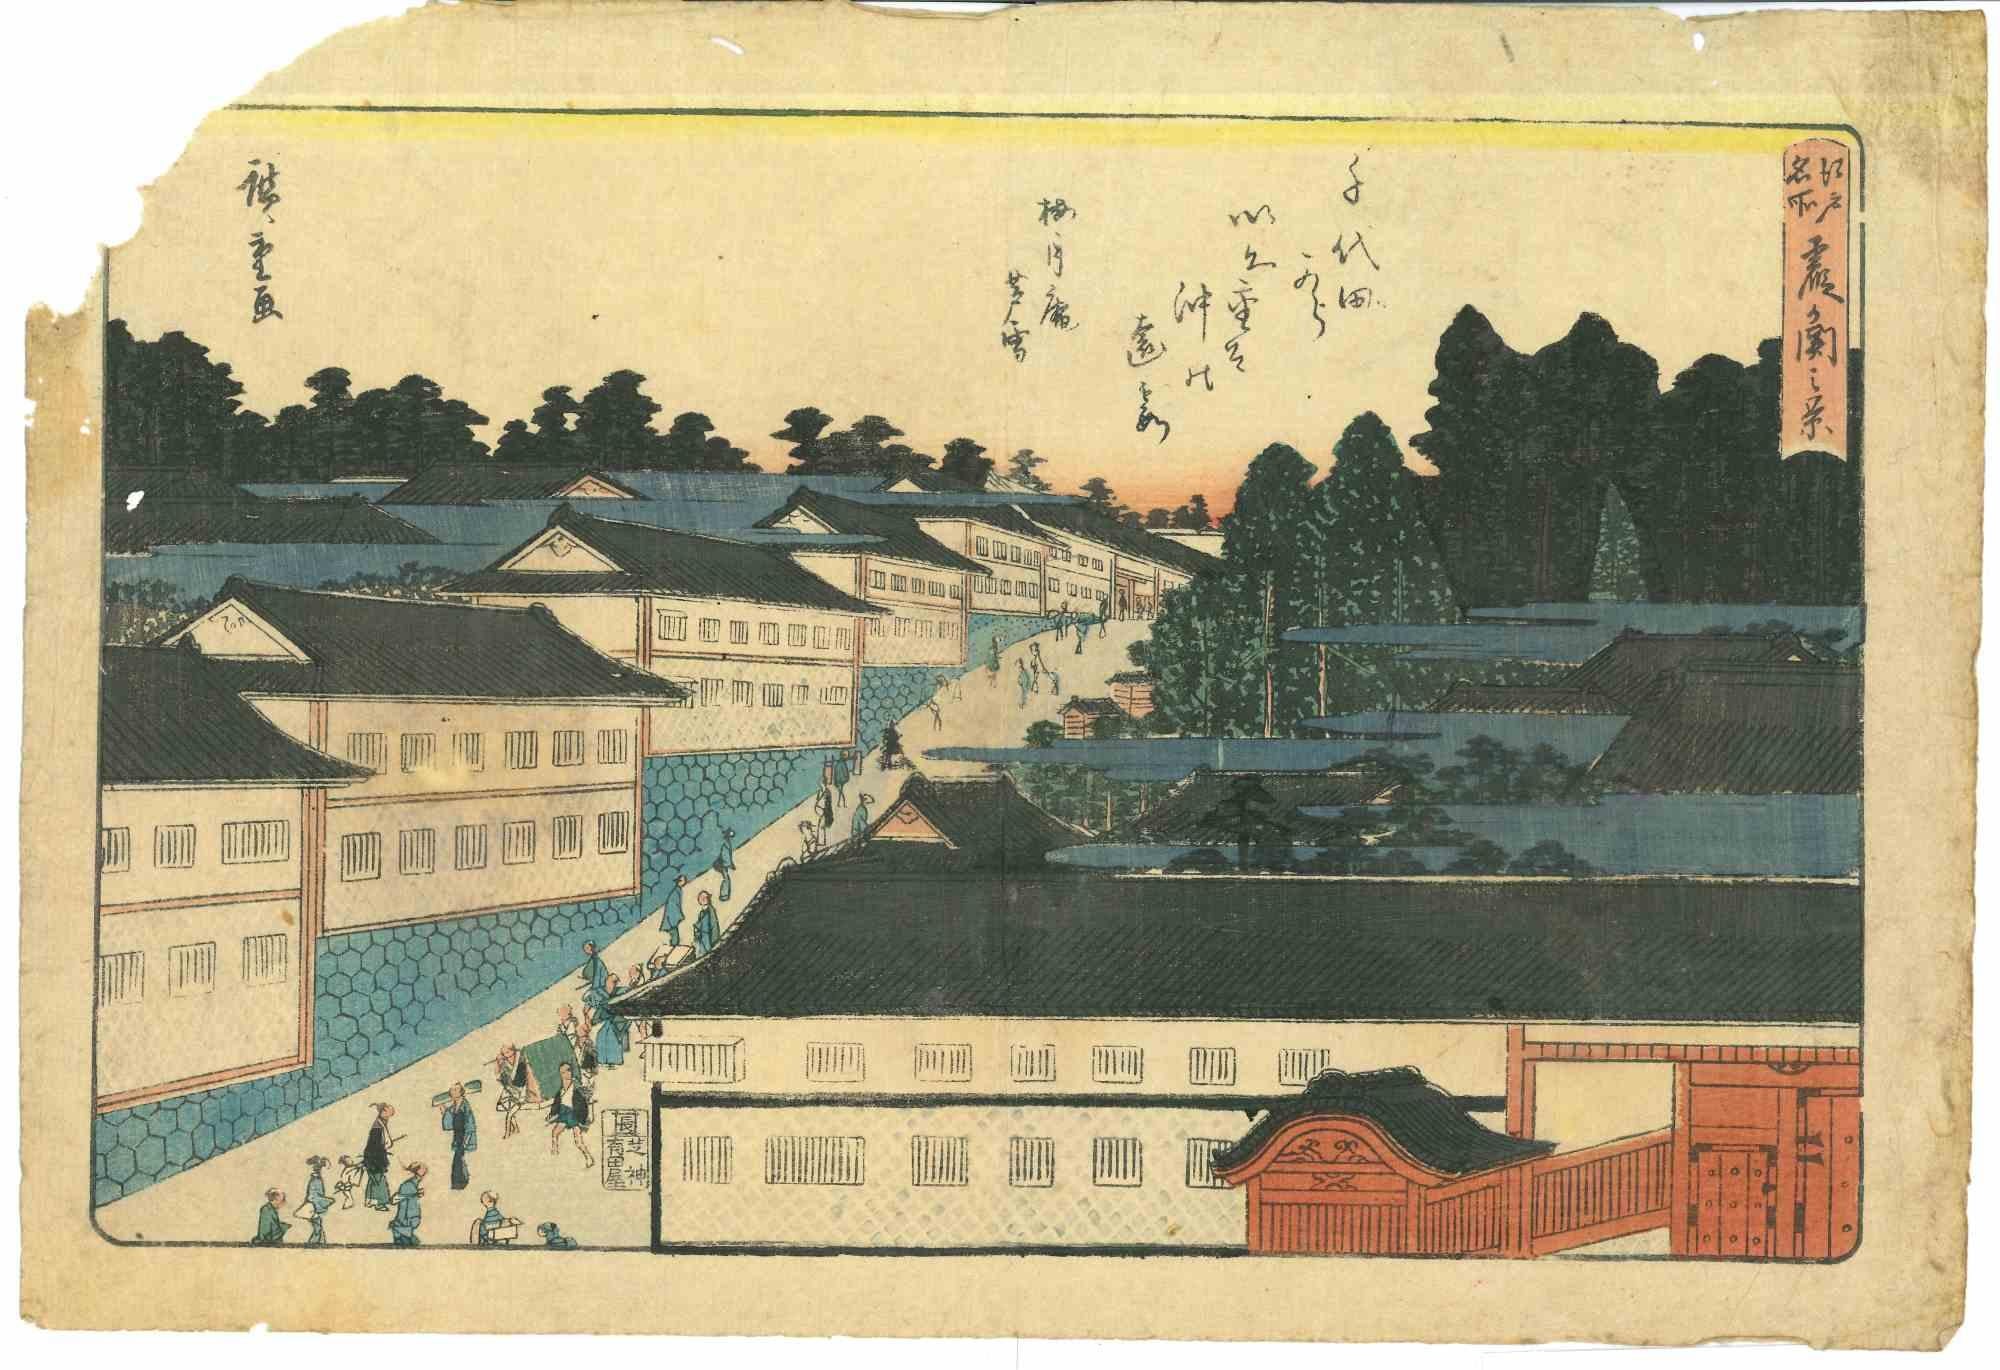 Kasumigaseki Nokei is a polychrome woodblock print (nishiki-e, ink and colour on paper) by Utagawa Hiroshige (Japanese, 1797-1858). This plate is from the print suite Famous Places of Edo, designed around 1840.

Signed on plate and in a cartouche